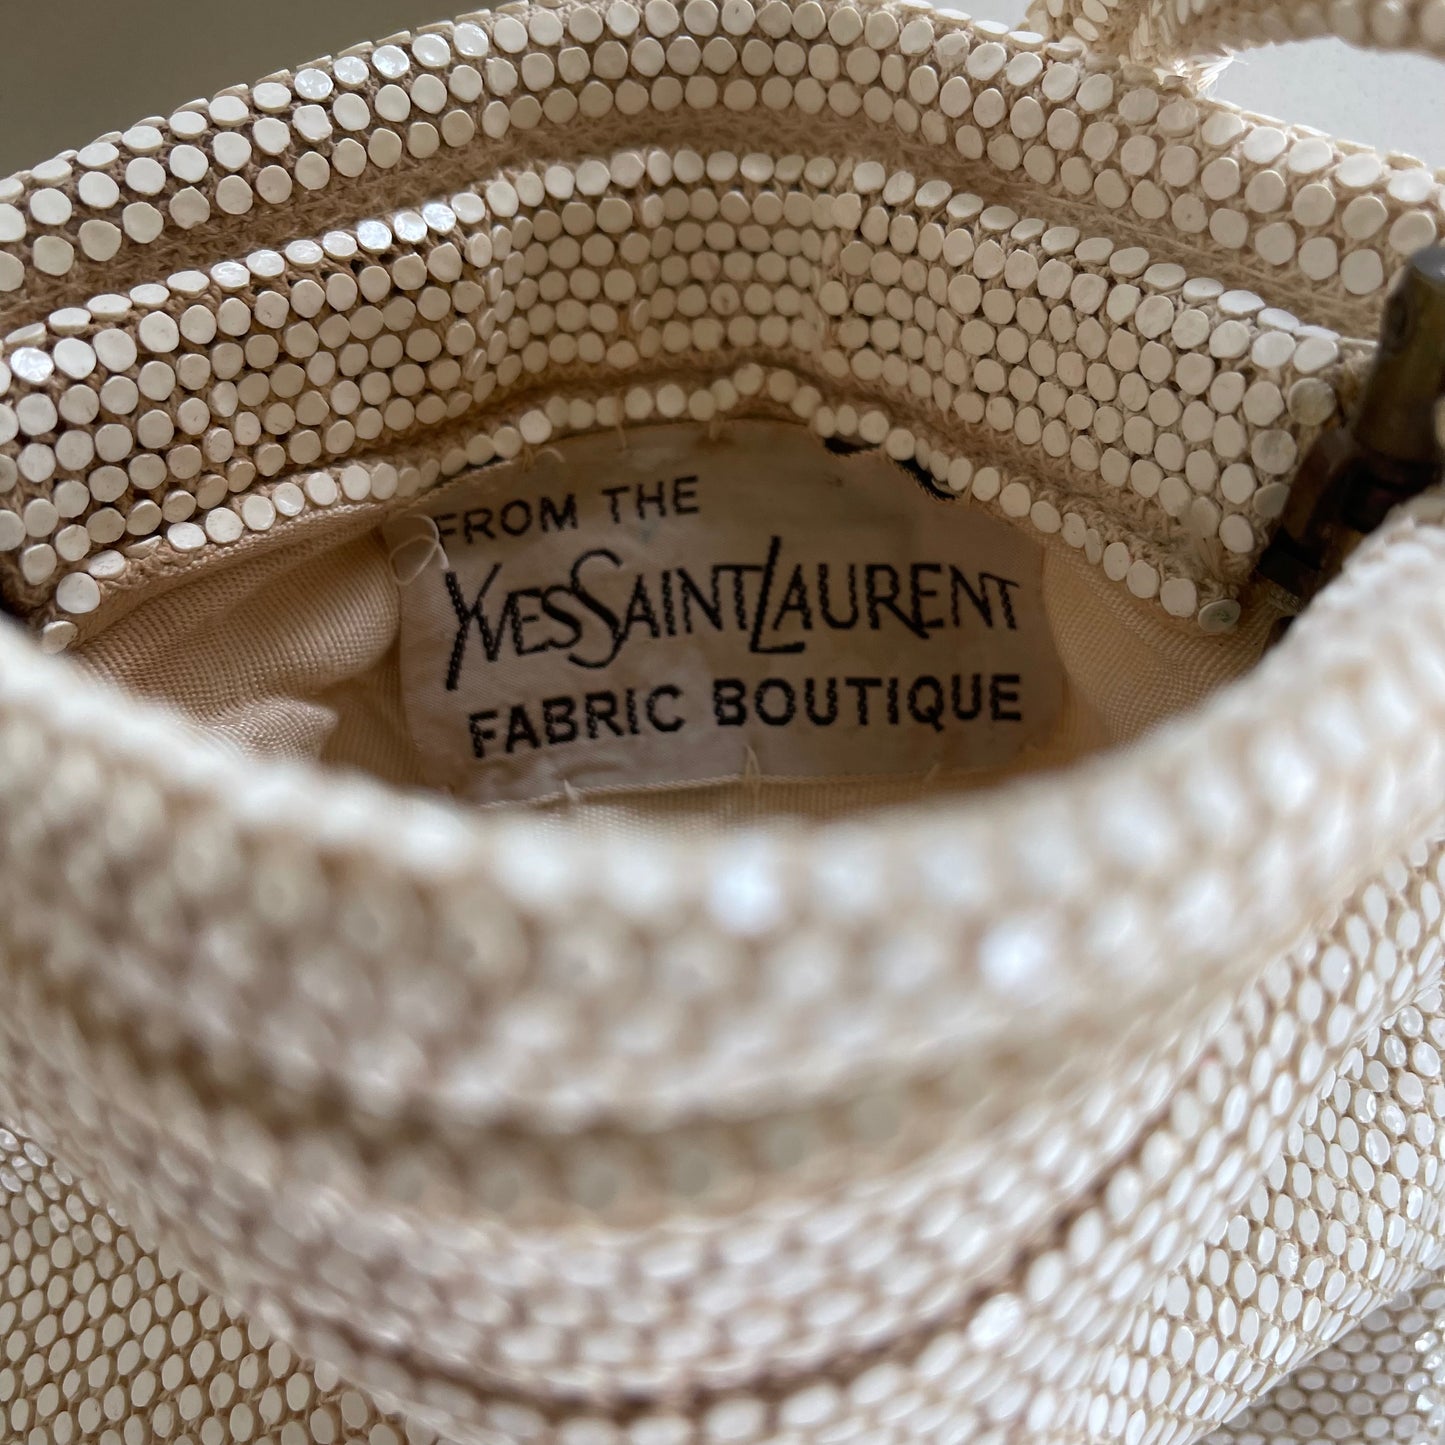 Vintage 1969 YSL Yves Saint Laurent Fabric Boutique Purse in Ivory